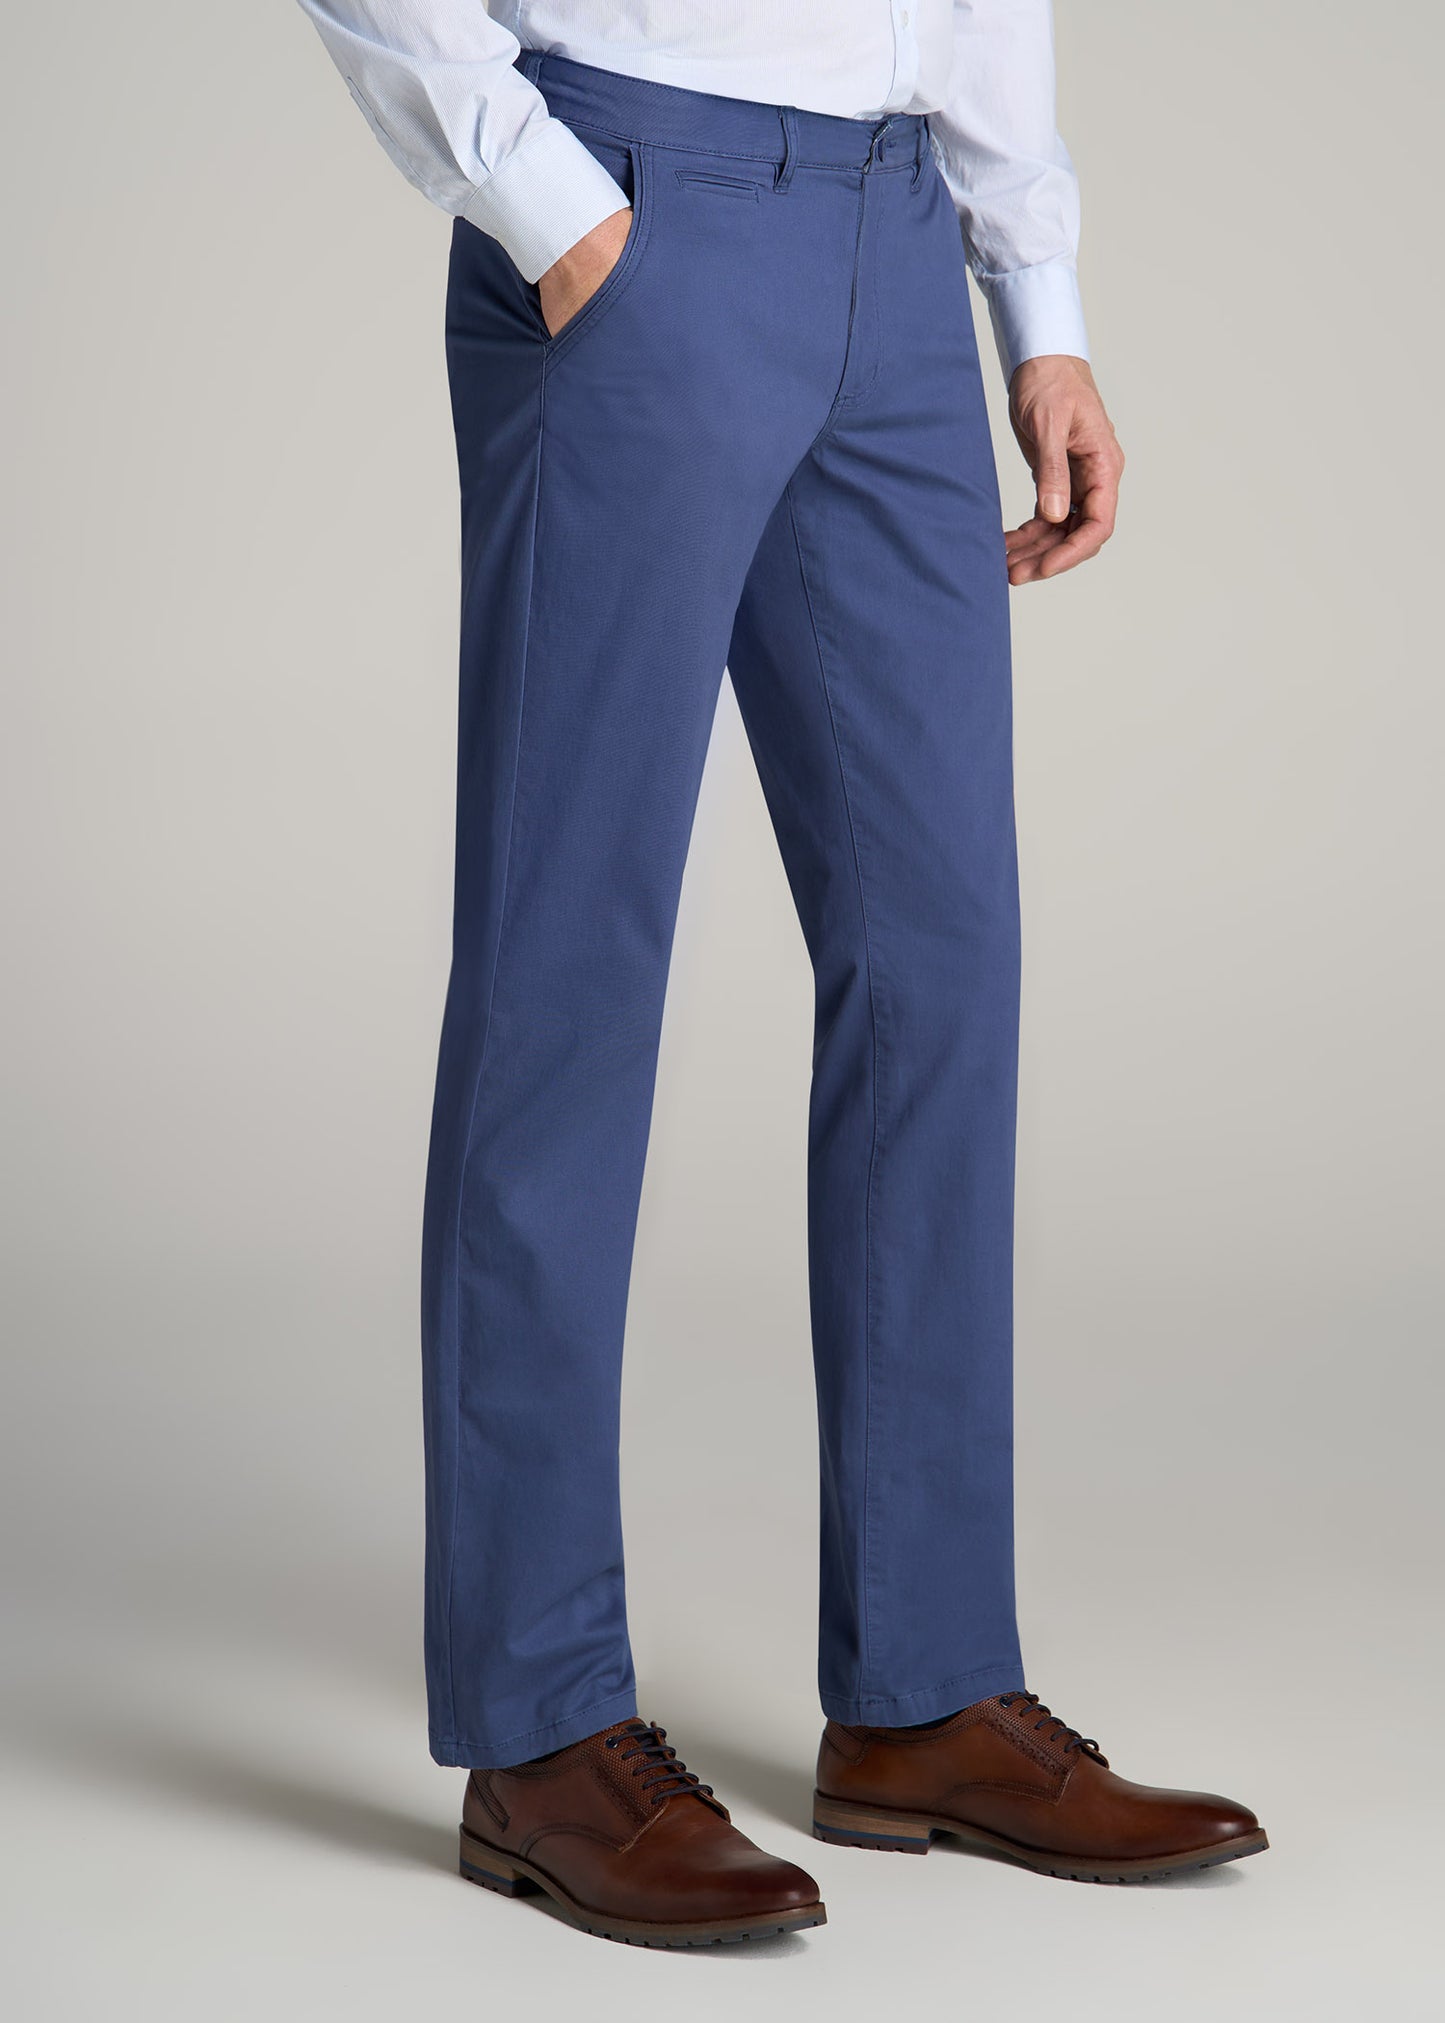 Carman TAPERED Chinos in Steel Blue - Pants for Tall Men